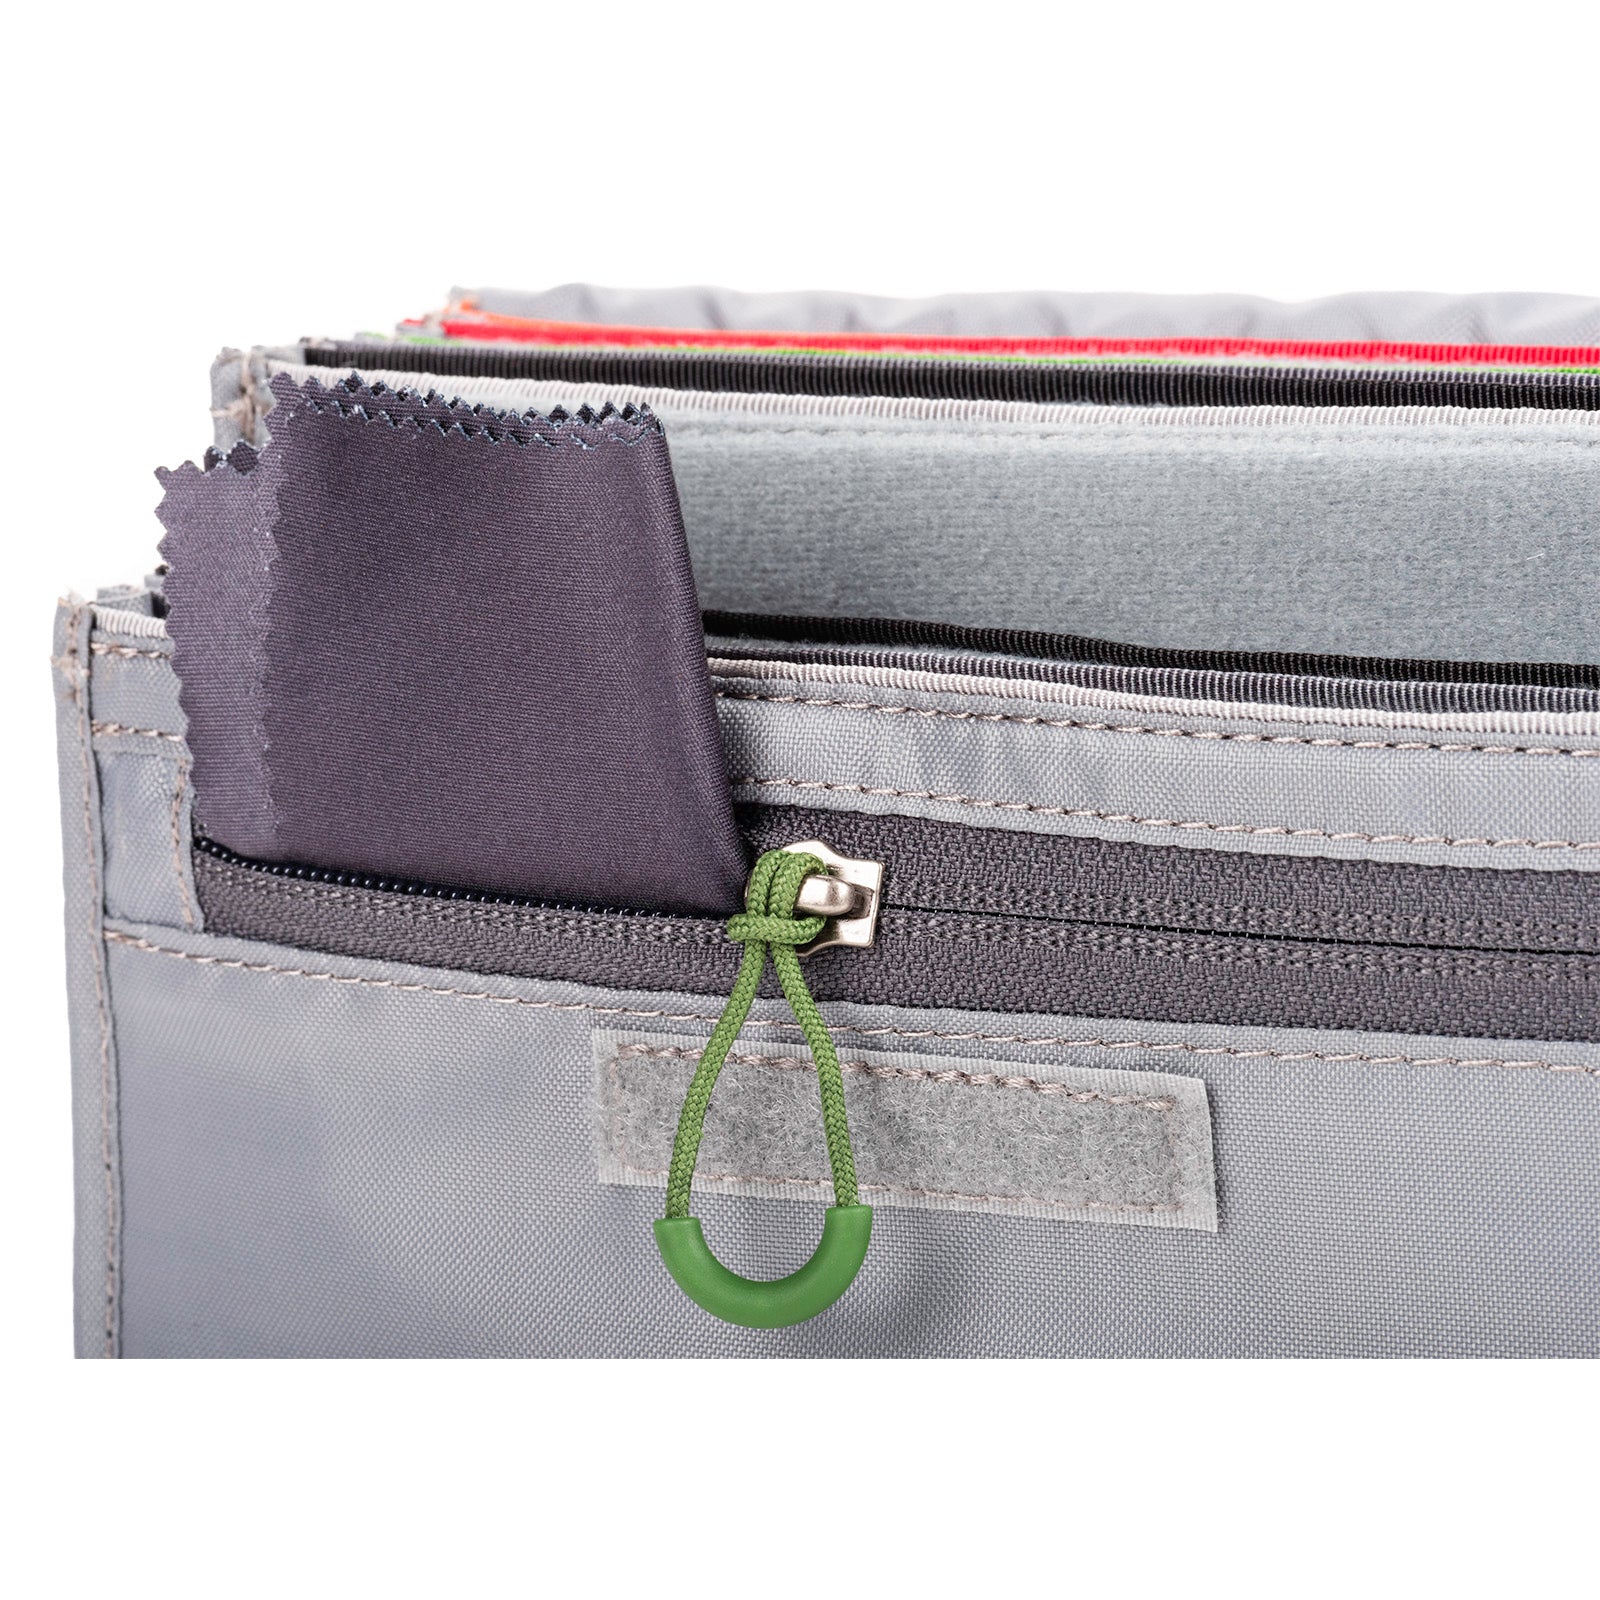 Interior zippered pocket for small accessories, like a lens cloth